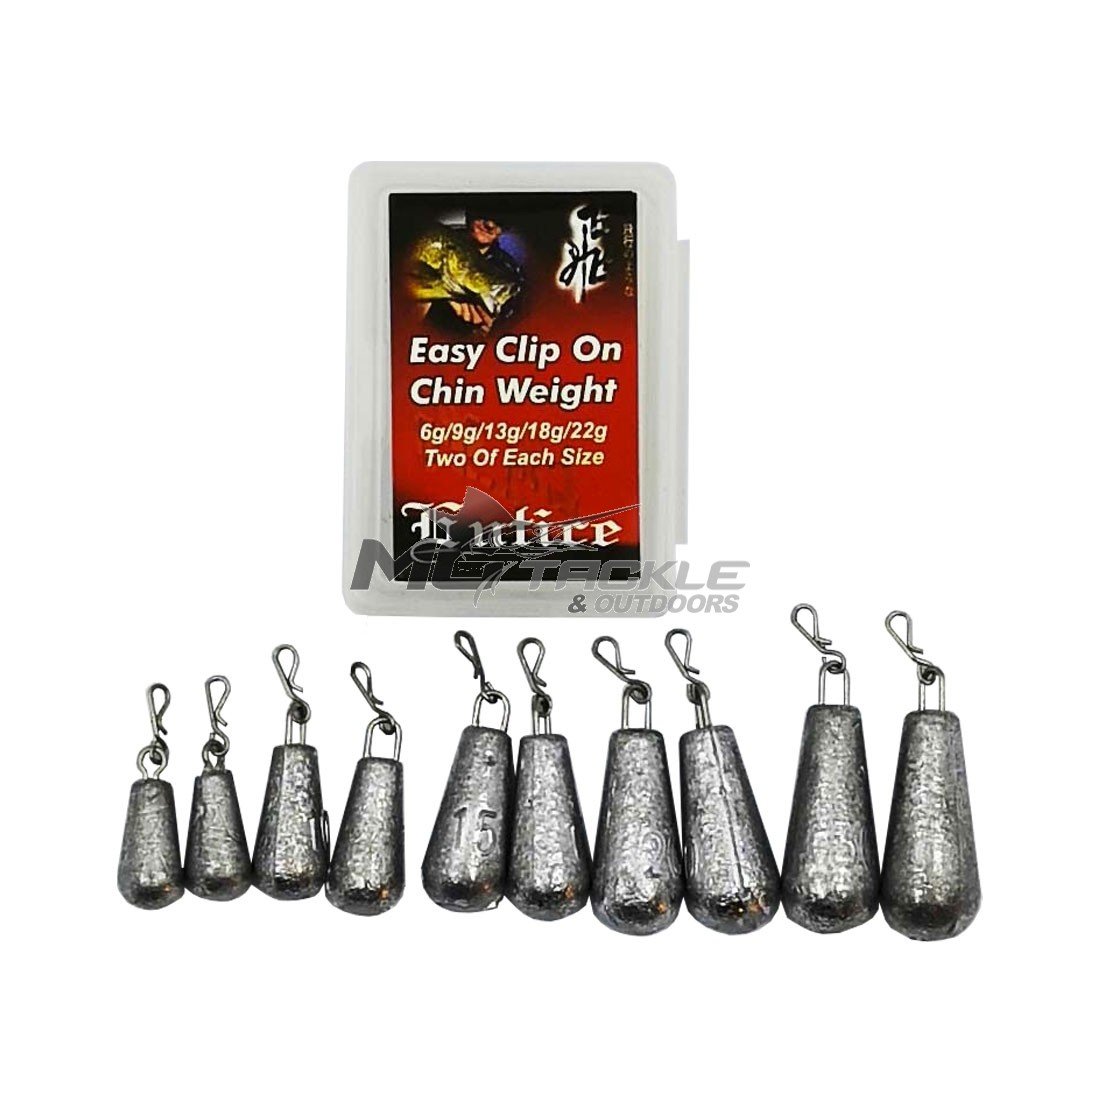 Entice Clip On Assorted Chin Weights